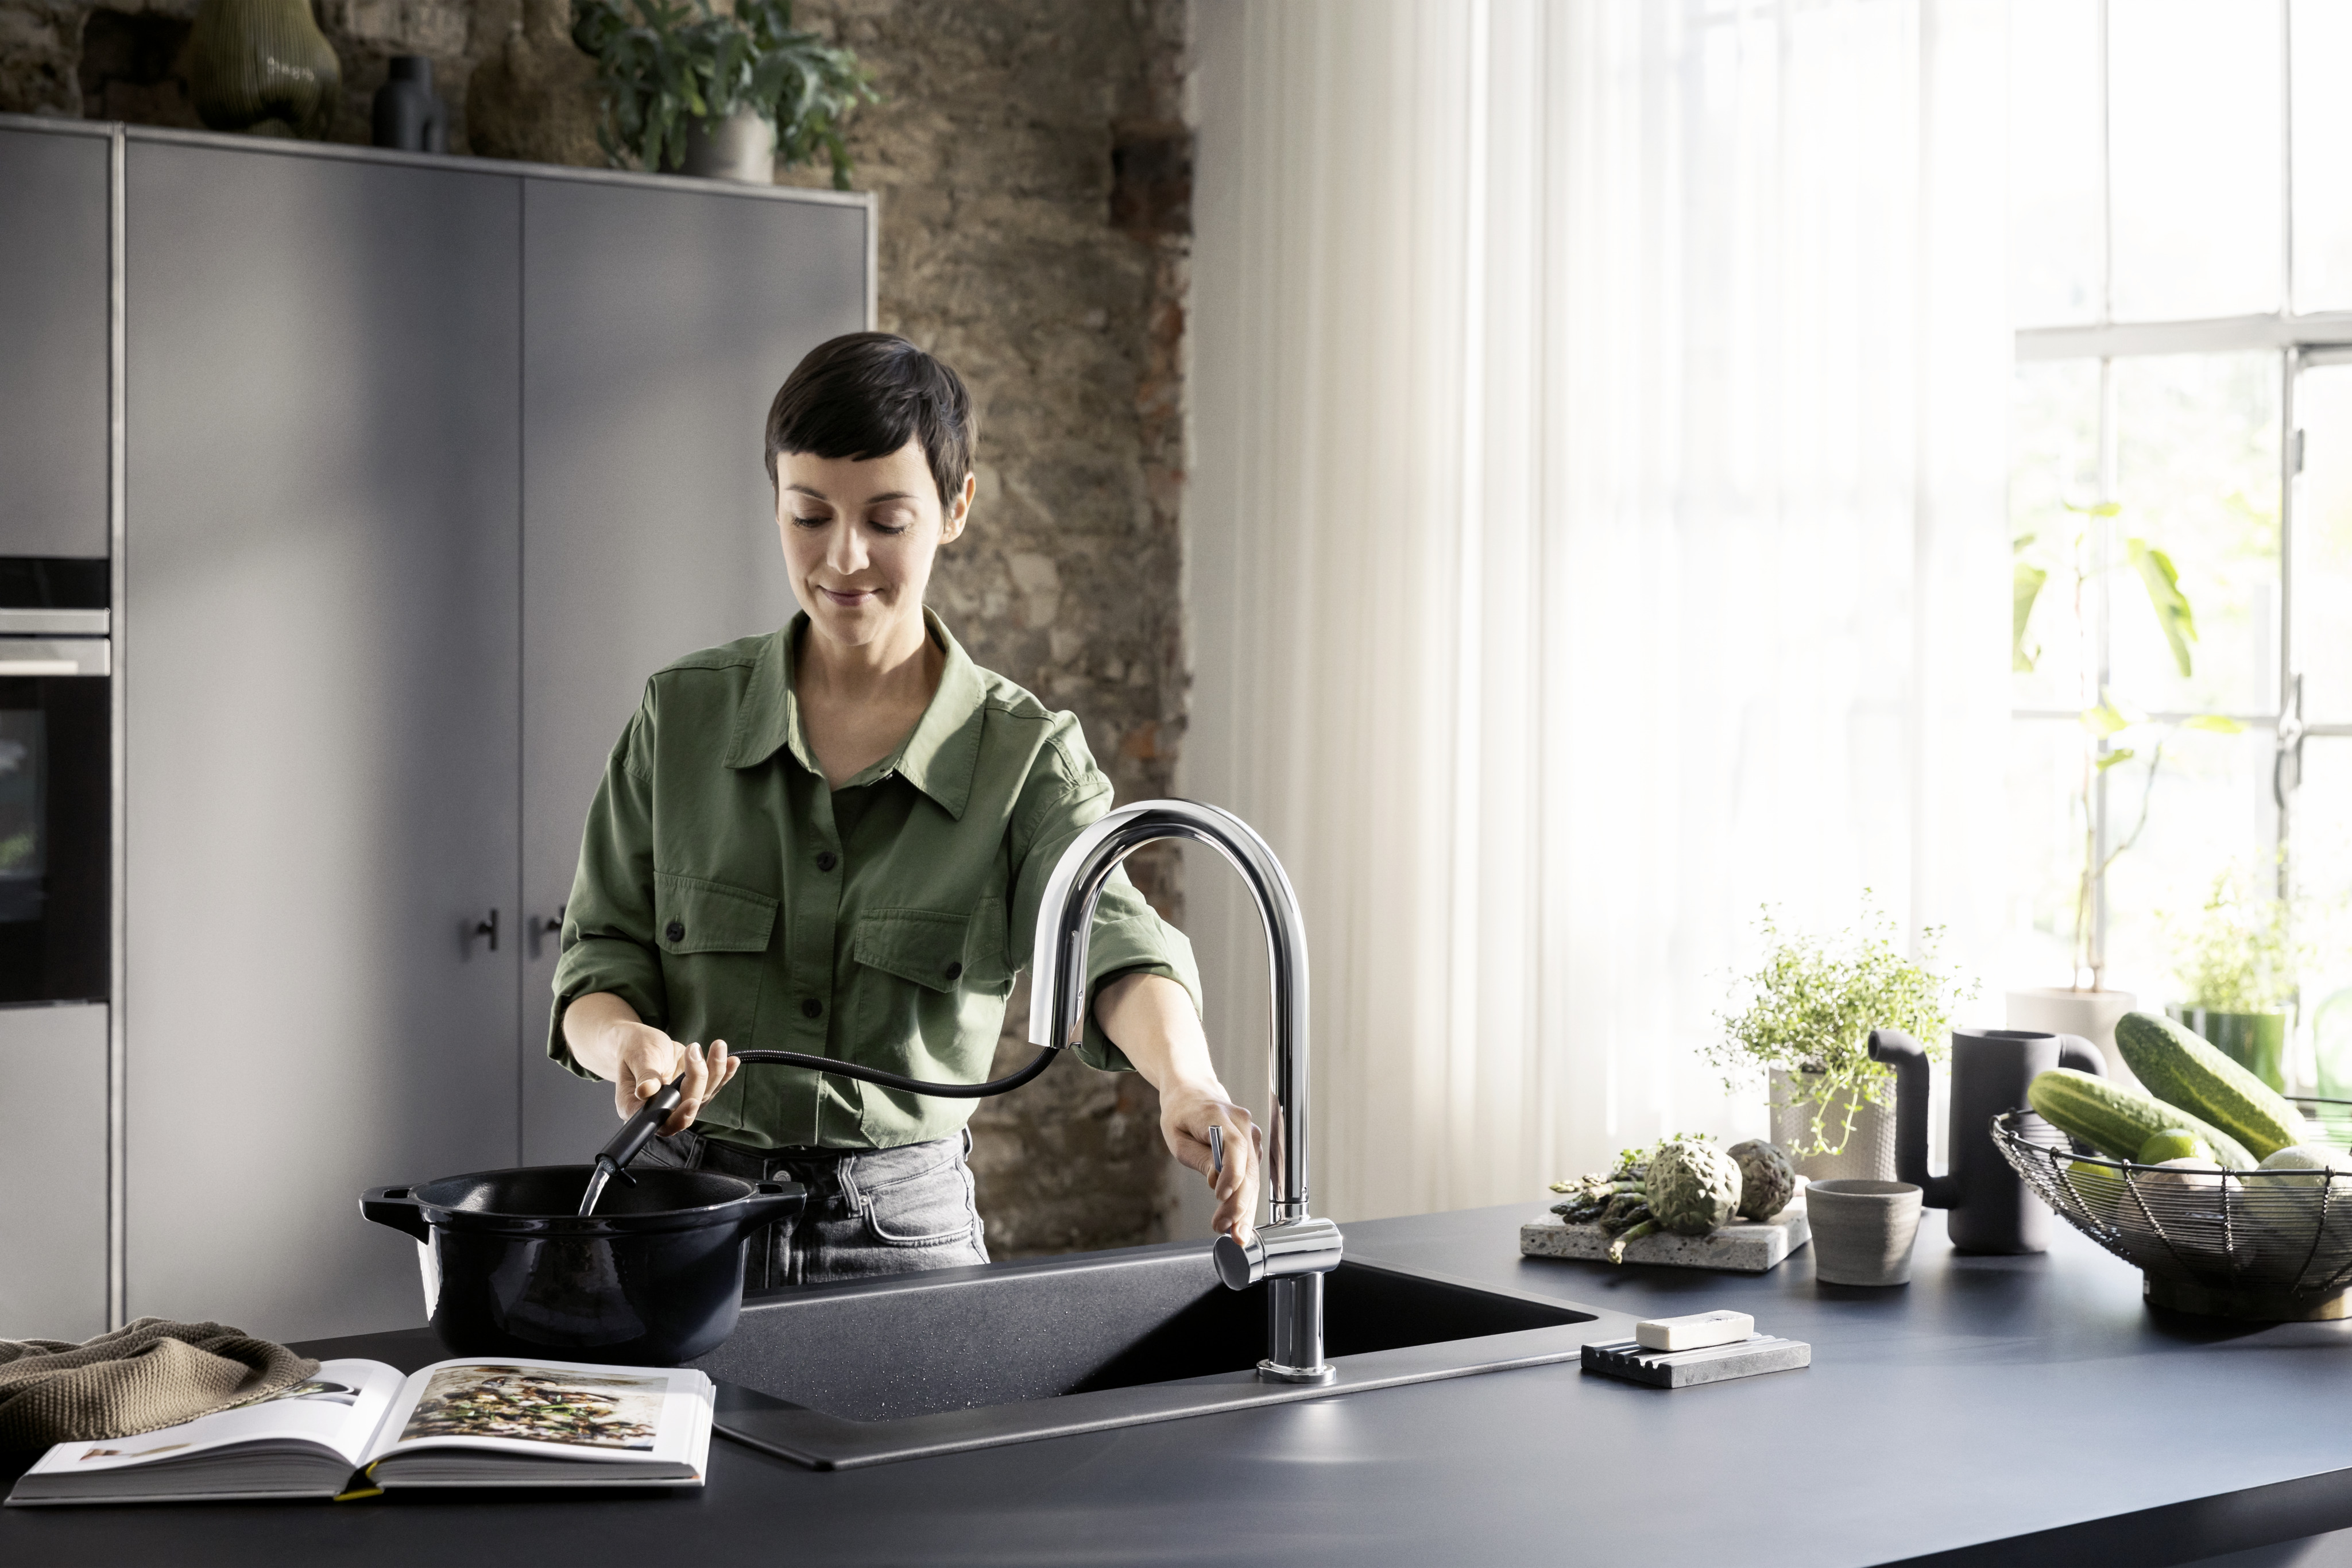 hansgrohe Kitchen mixers: Aqittura M91, SodaSystem 210, pull-out 